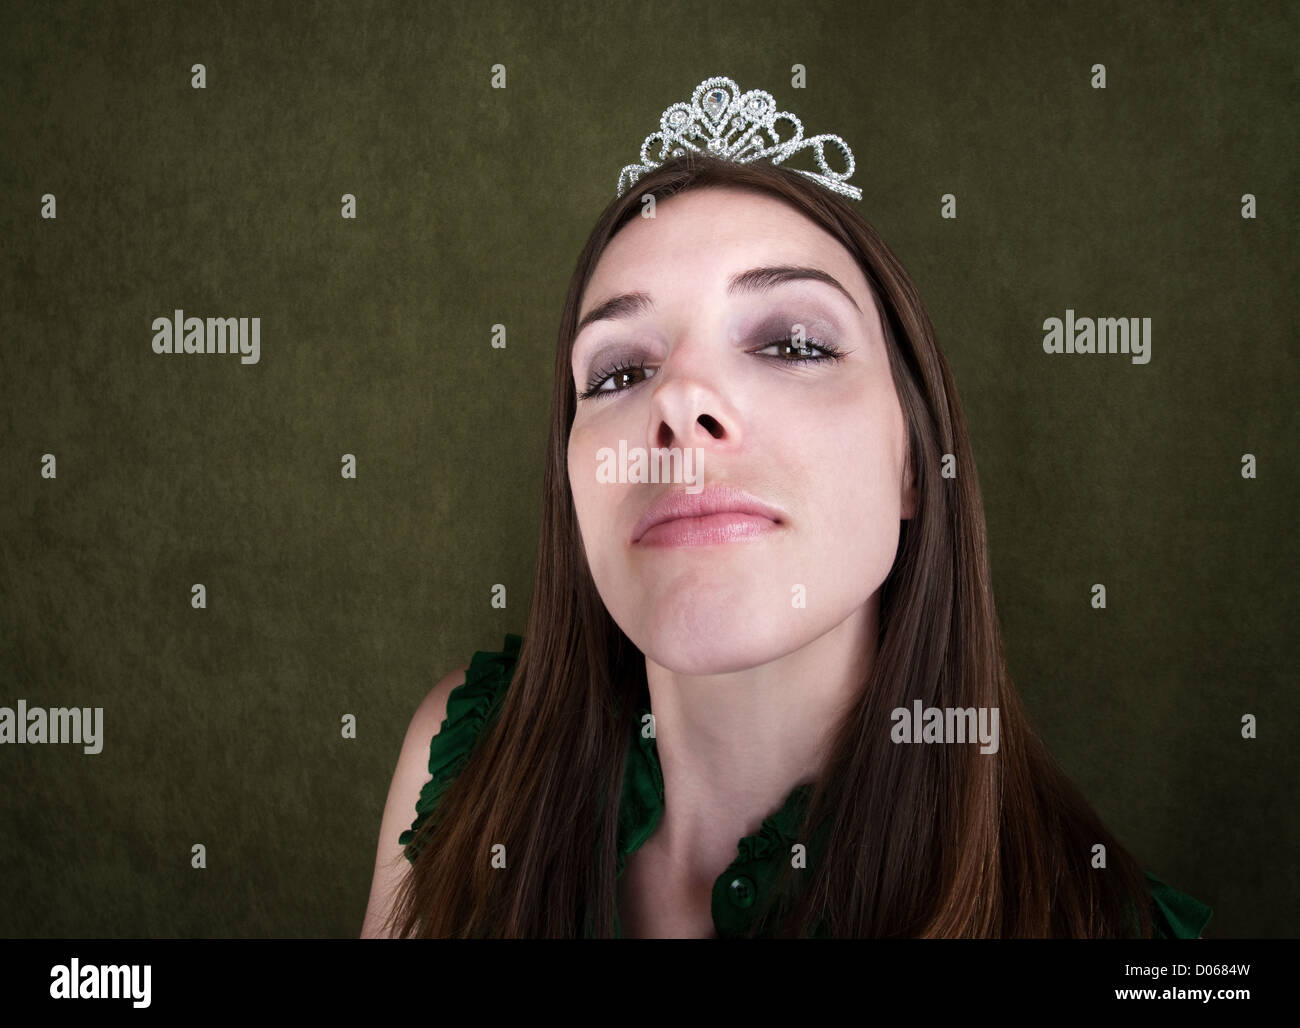 Proud woman with tiara on green background Stock Photo